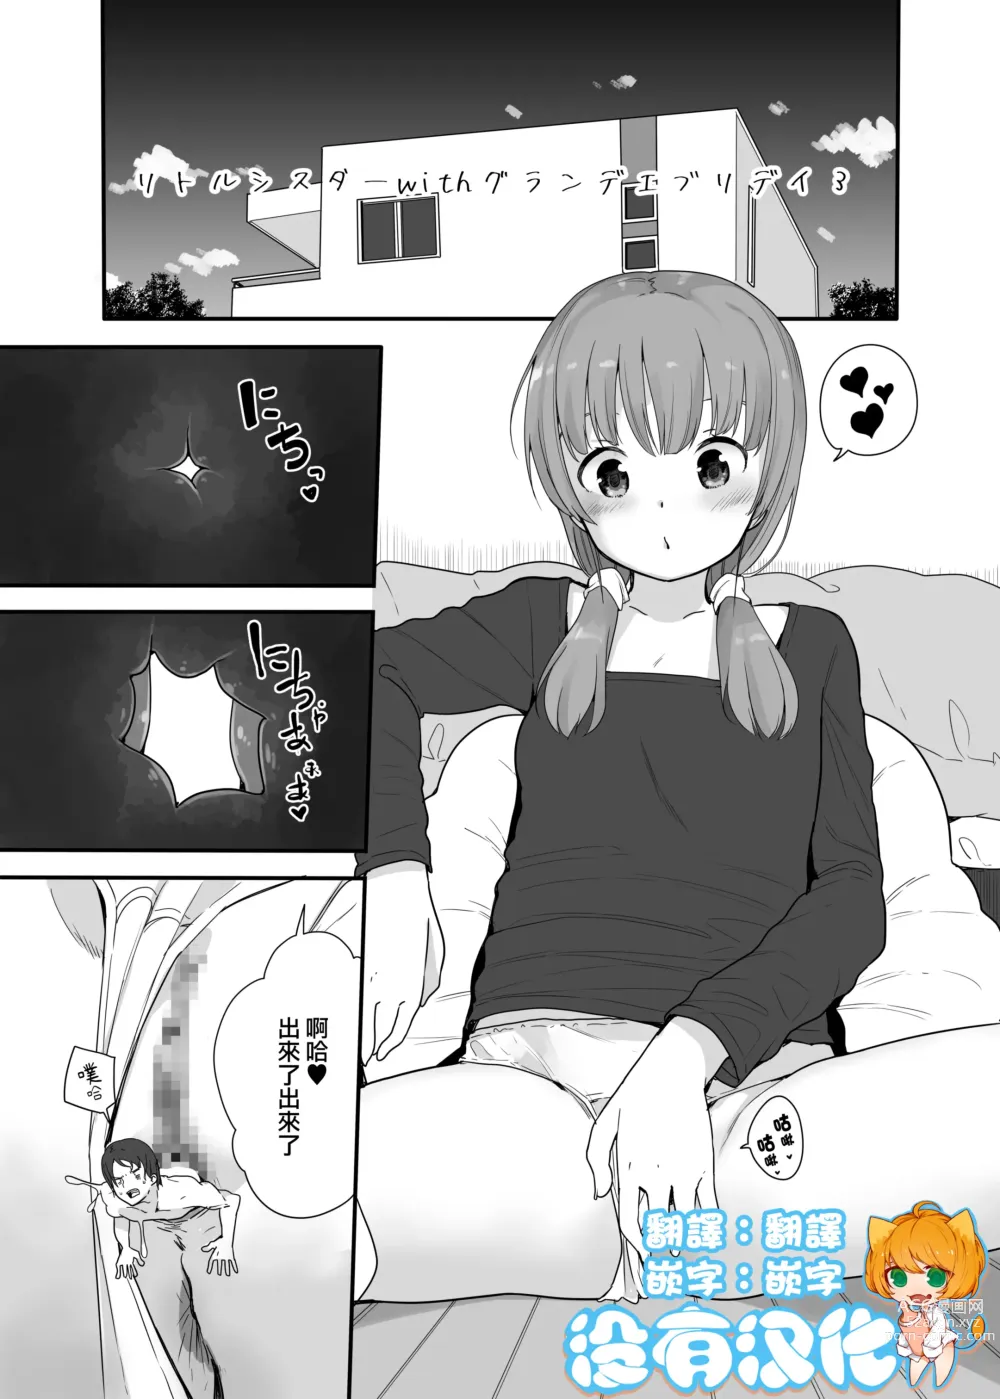 Page 1 of doujinshi Little Sister With Grande Everyday 3